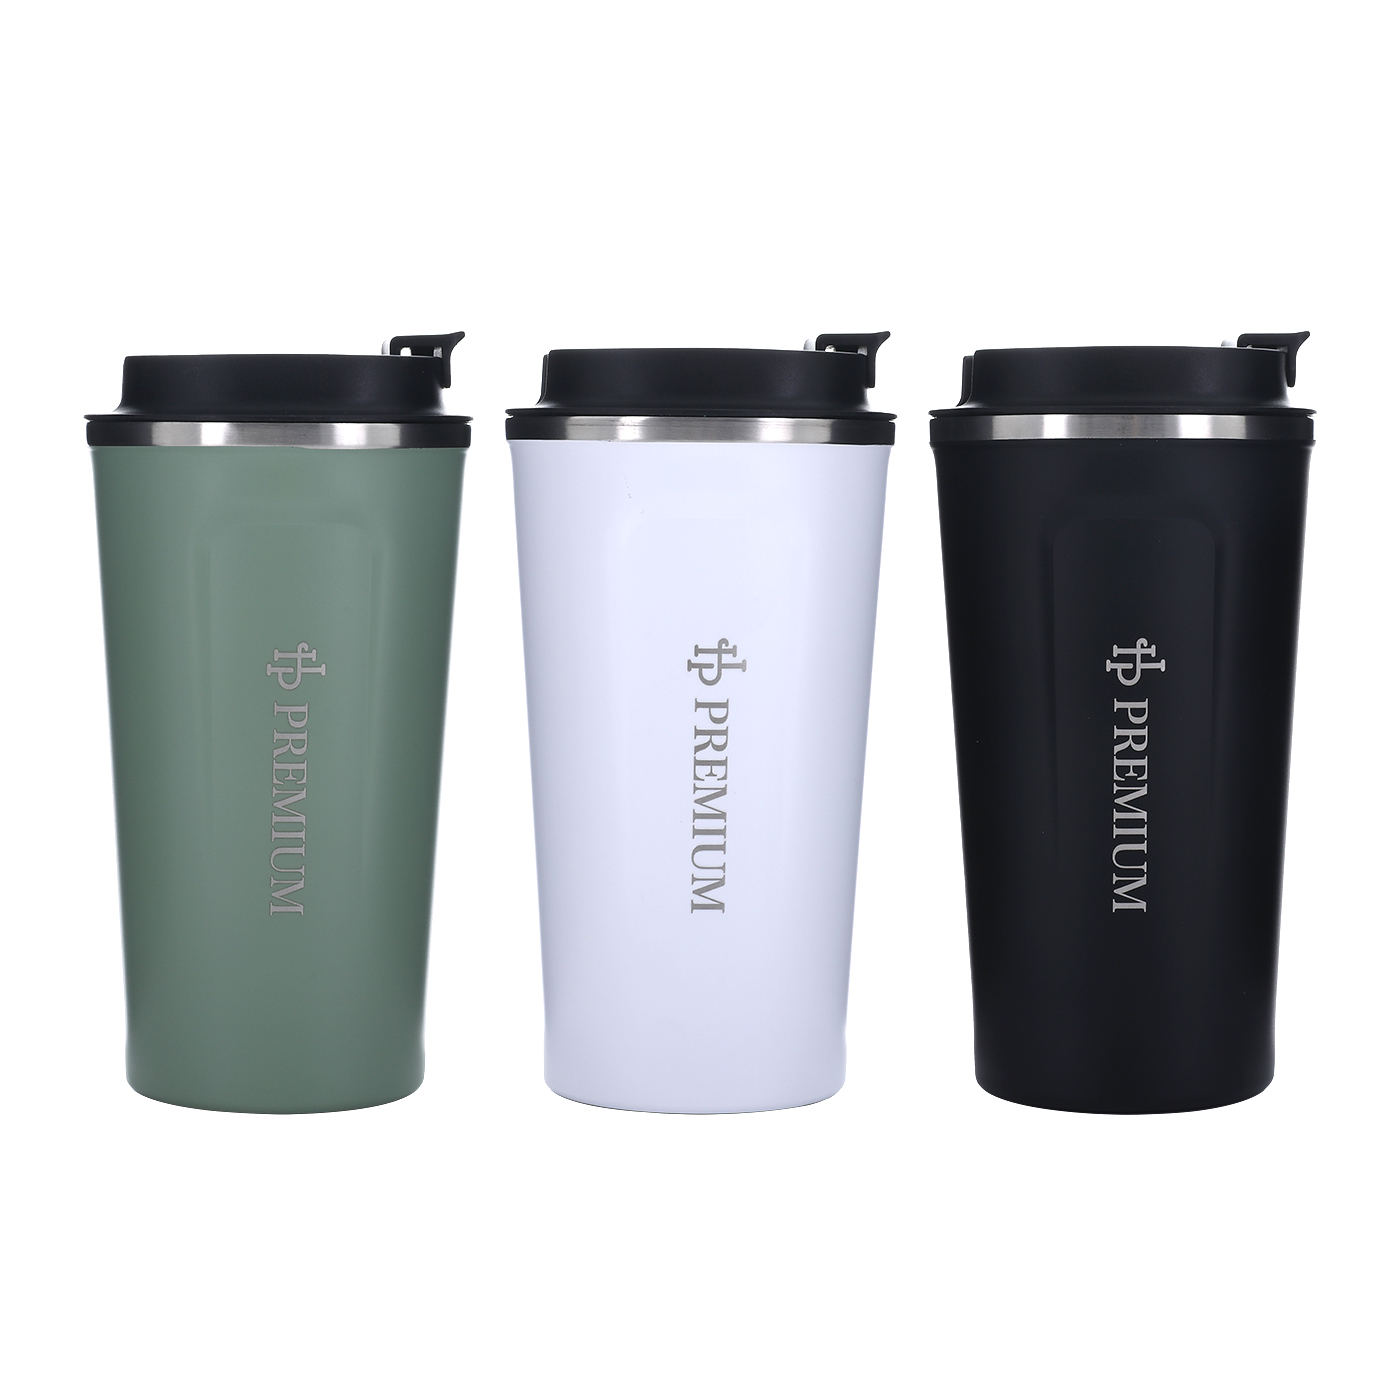 17 oz. Insulated Mug With Leakproof Lid